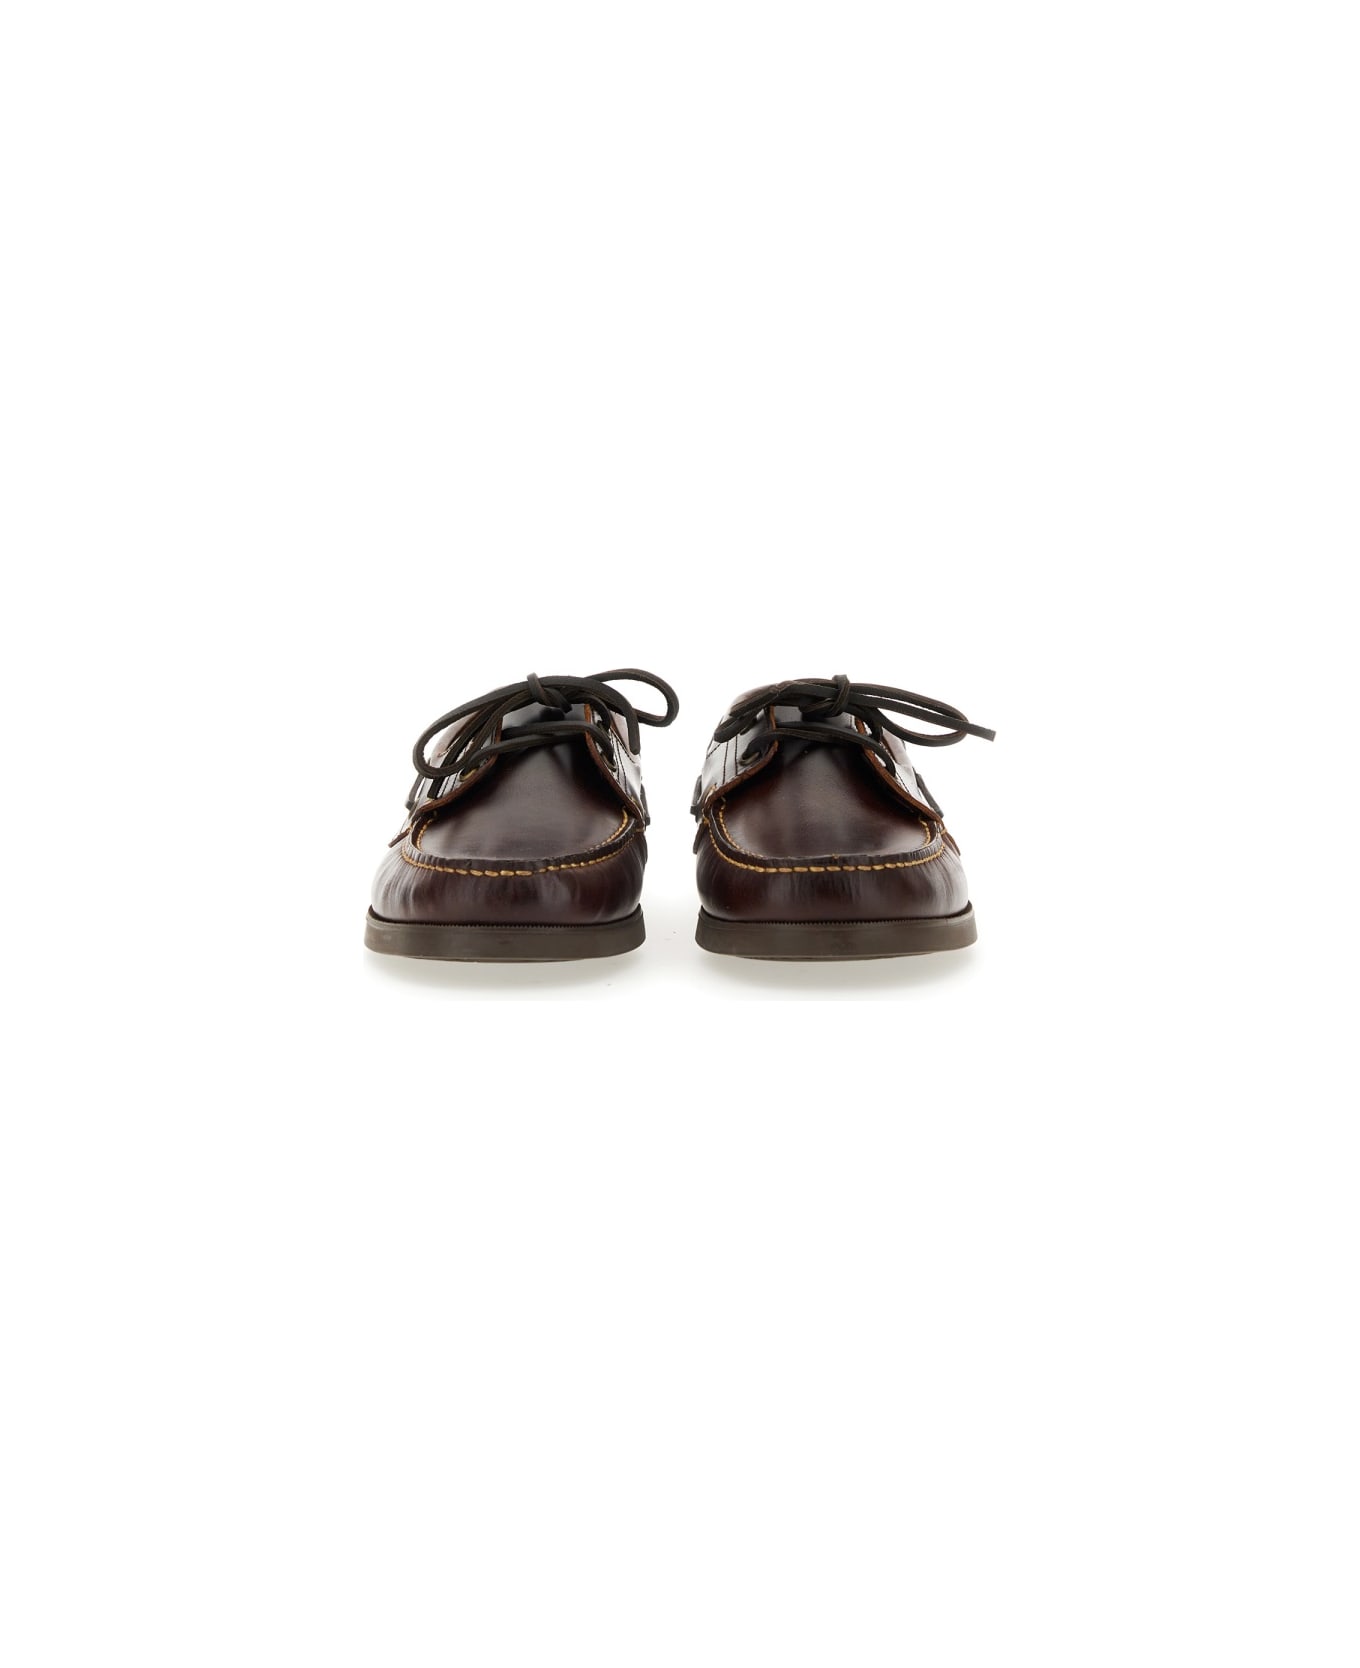 Paraboot Moccasin "barth" - BROWN